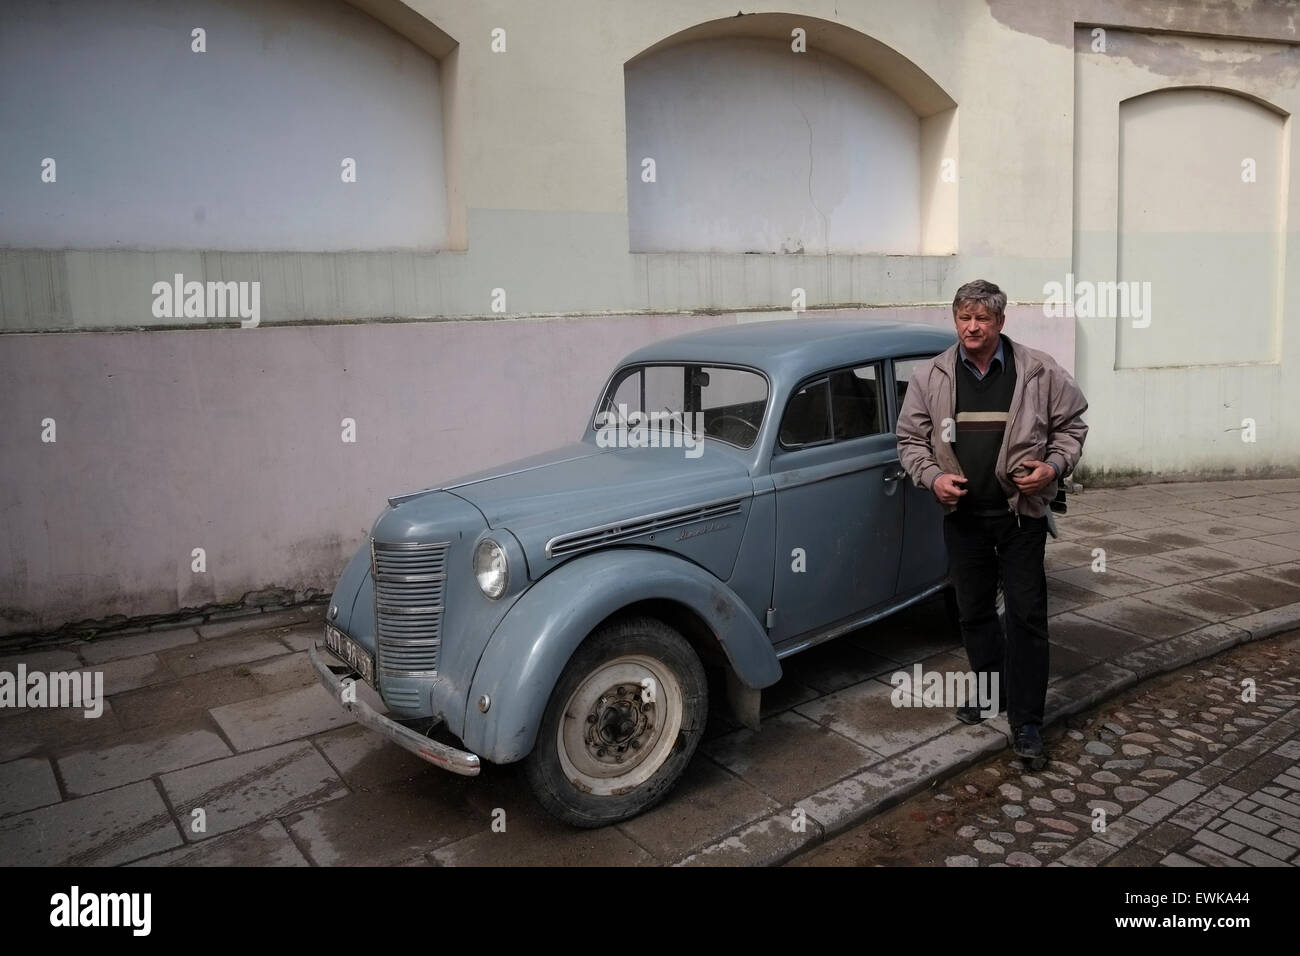 An old Soviet era Moskvitch 400-420 car that was introduced in 1947 by the Soviet manufacturer Moskvitch is seen in the old town of Vilnius a UNESCO World Heritage Site and capital of Lithuania. Stock Photo